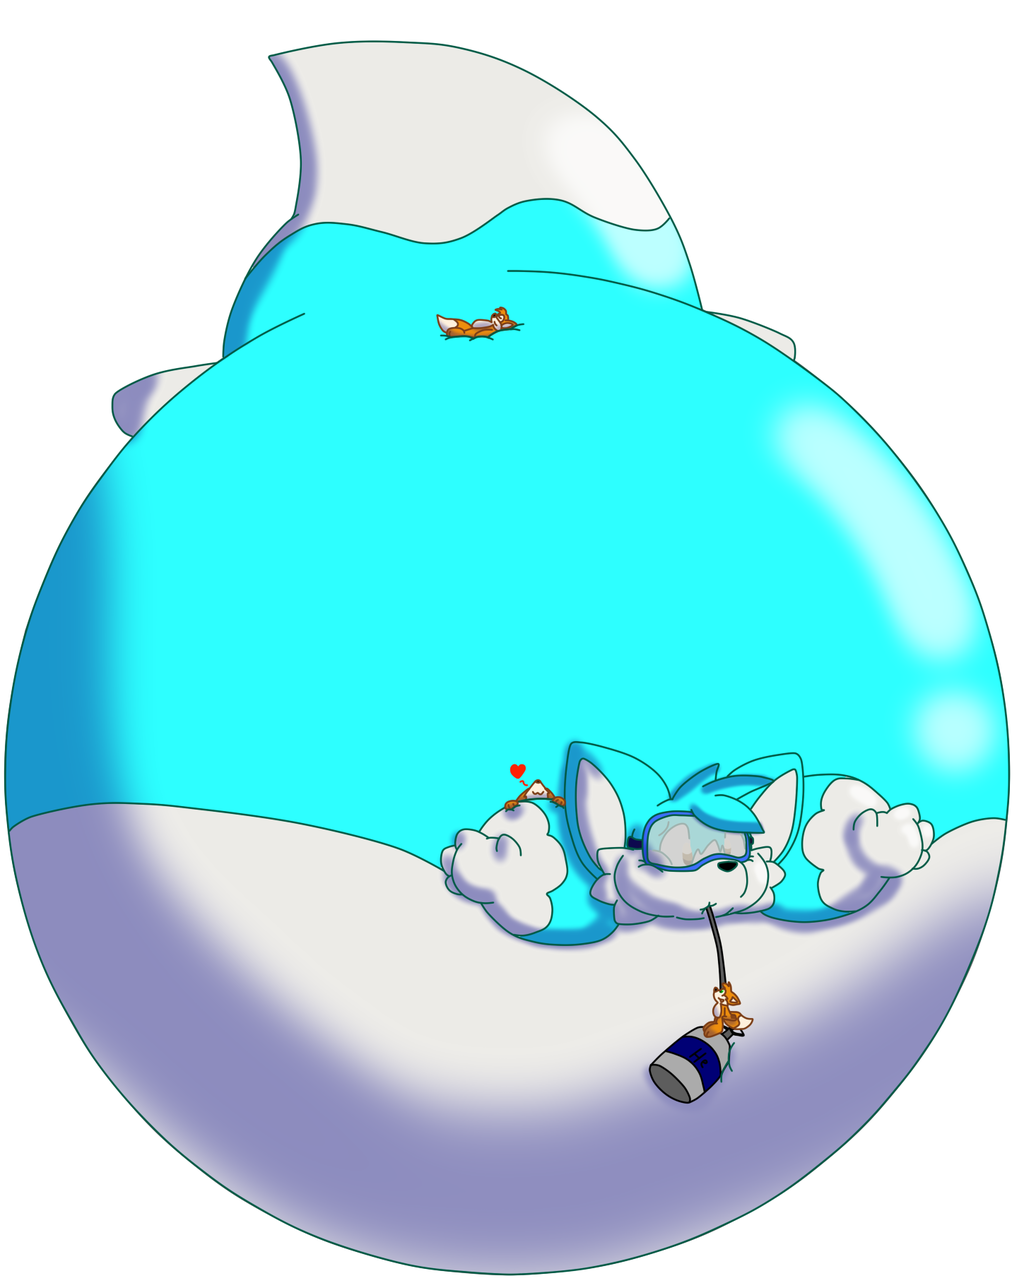 Some micros inflated me!